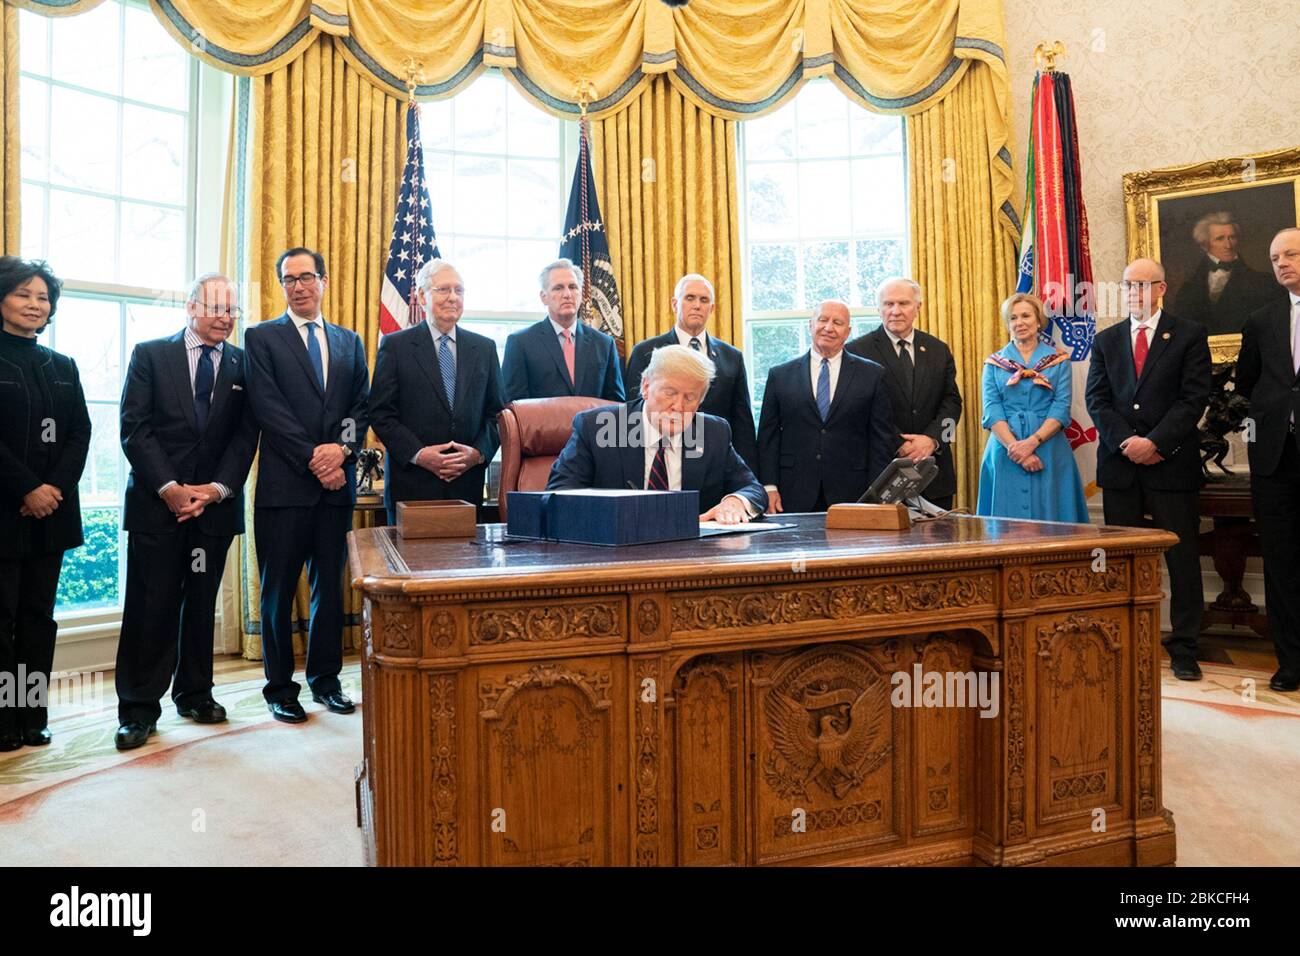 President Donald J. Trump and Vice President Mike Pence are joined by Senate Majority Leader Mitch McConnell; House Minority Leader Rep. Kevin McCarthy; Secretary of the Treasury Steven Mnuchin; Secretary of Agriculture Sonny Perdue; Secretary of Labor Eugene Scalia; Secretary of Transportation Elaine Chao; USTR Ambassador Robert Lighthizer;  Rep. Kevin Brady, R-Texas; Rep. Greg Walden, R-Ore.; Rep. Steve Chabot, R-Ohio; Assistant to the President and NEC Director Larry Kudlow; White House Director of Legislative Affairs Eric Ueland; White House Coronavirus Task Force Coordinator Ambassador De Stock Photo